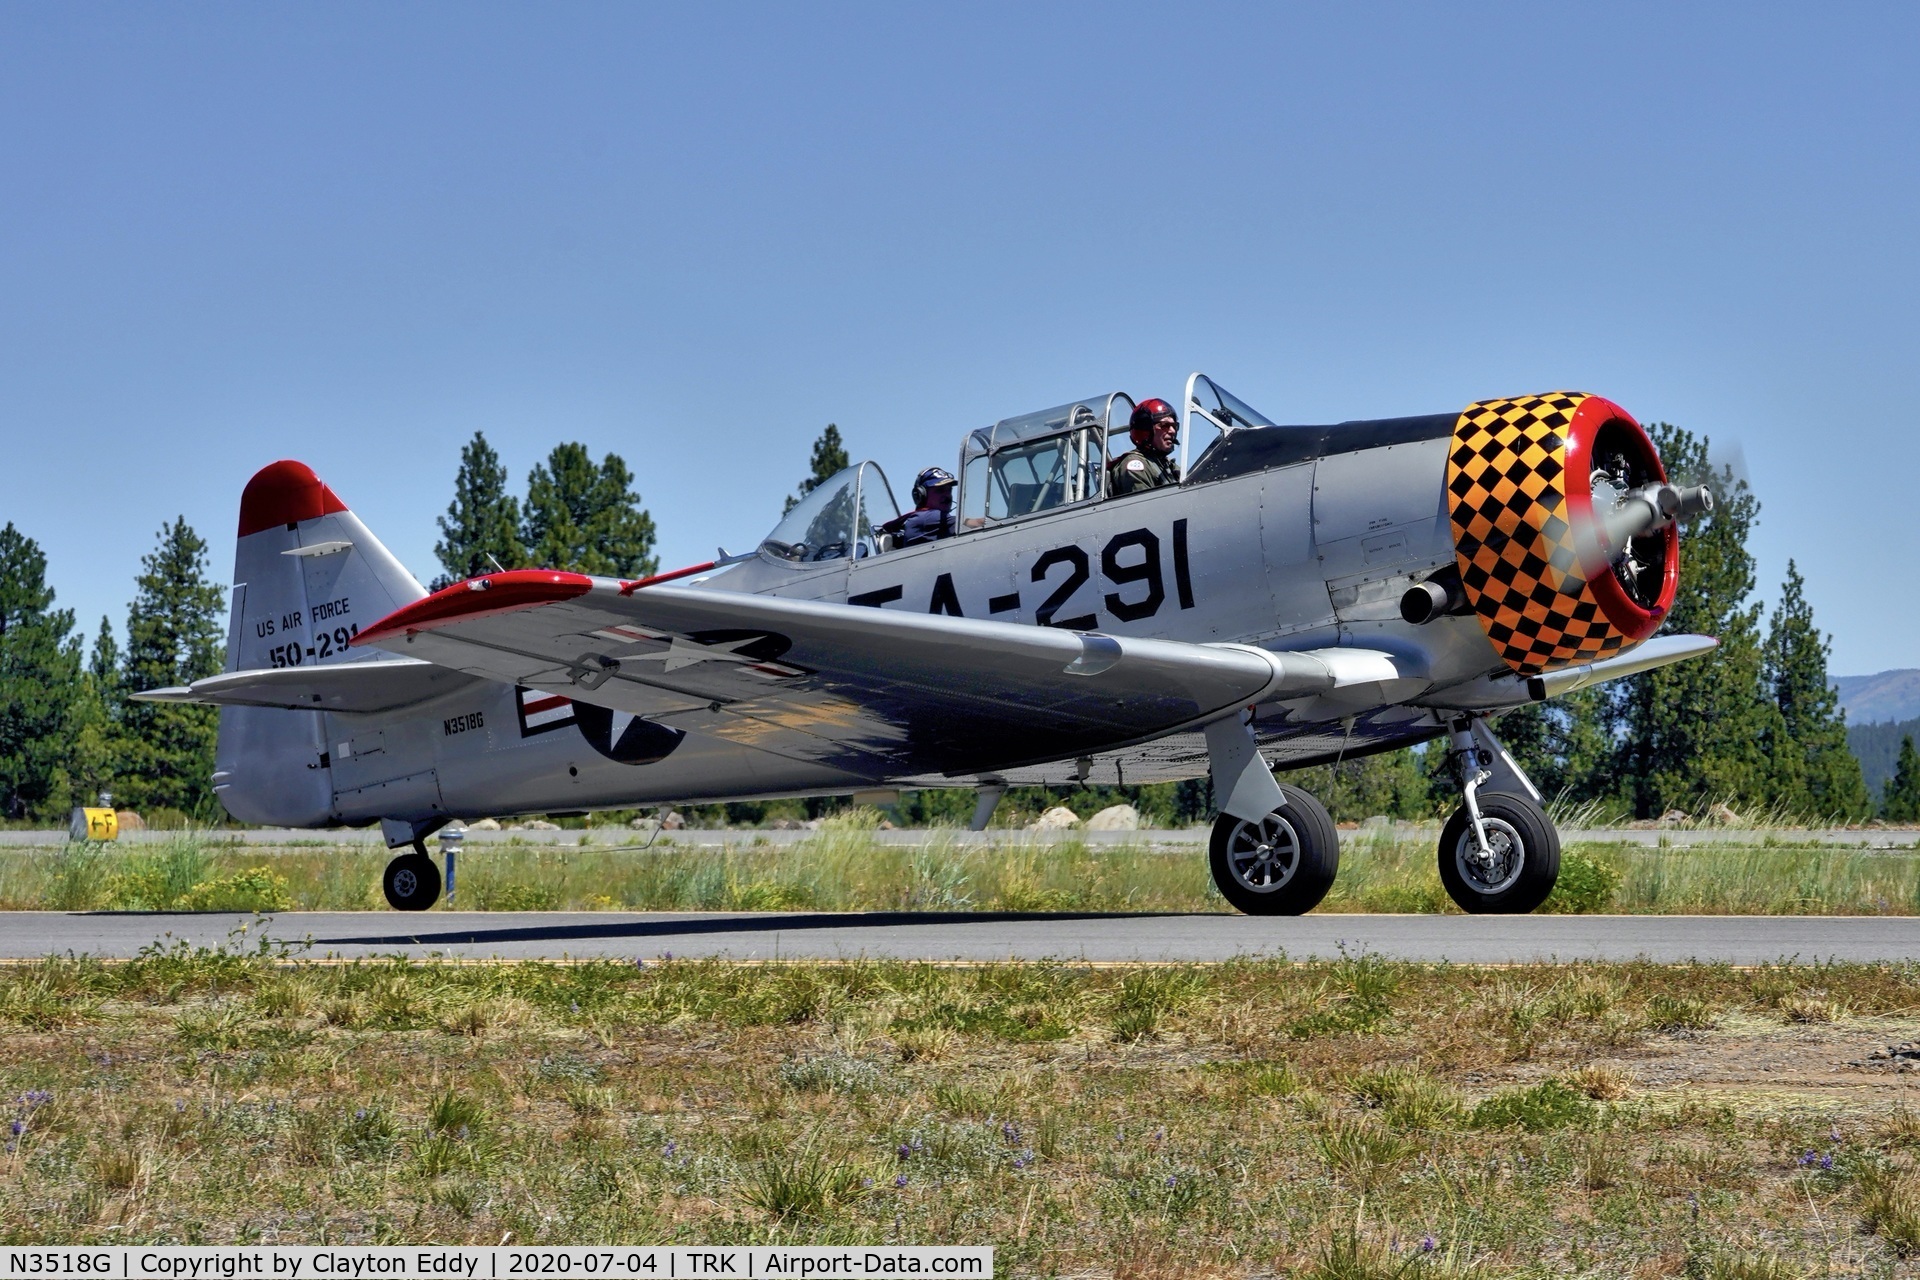 N3518G, North American T-6G Texan C/N 168-505, Part of the D-day Squadron Truckee Tahoe flyover July 4th 2020. Truckee Airport California 2020.